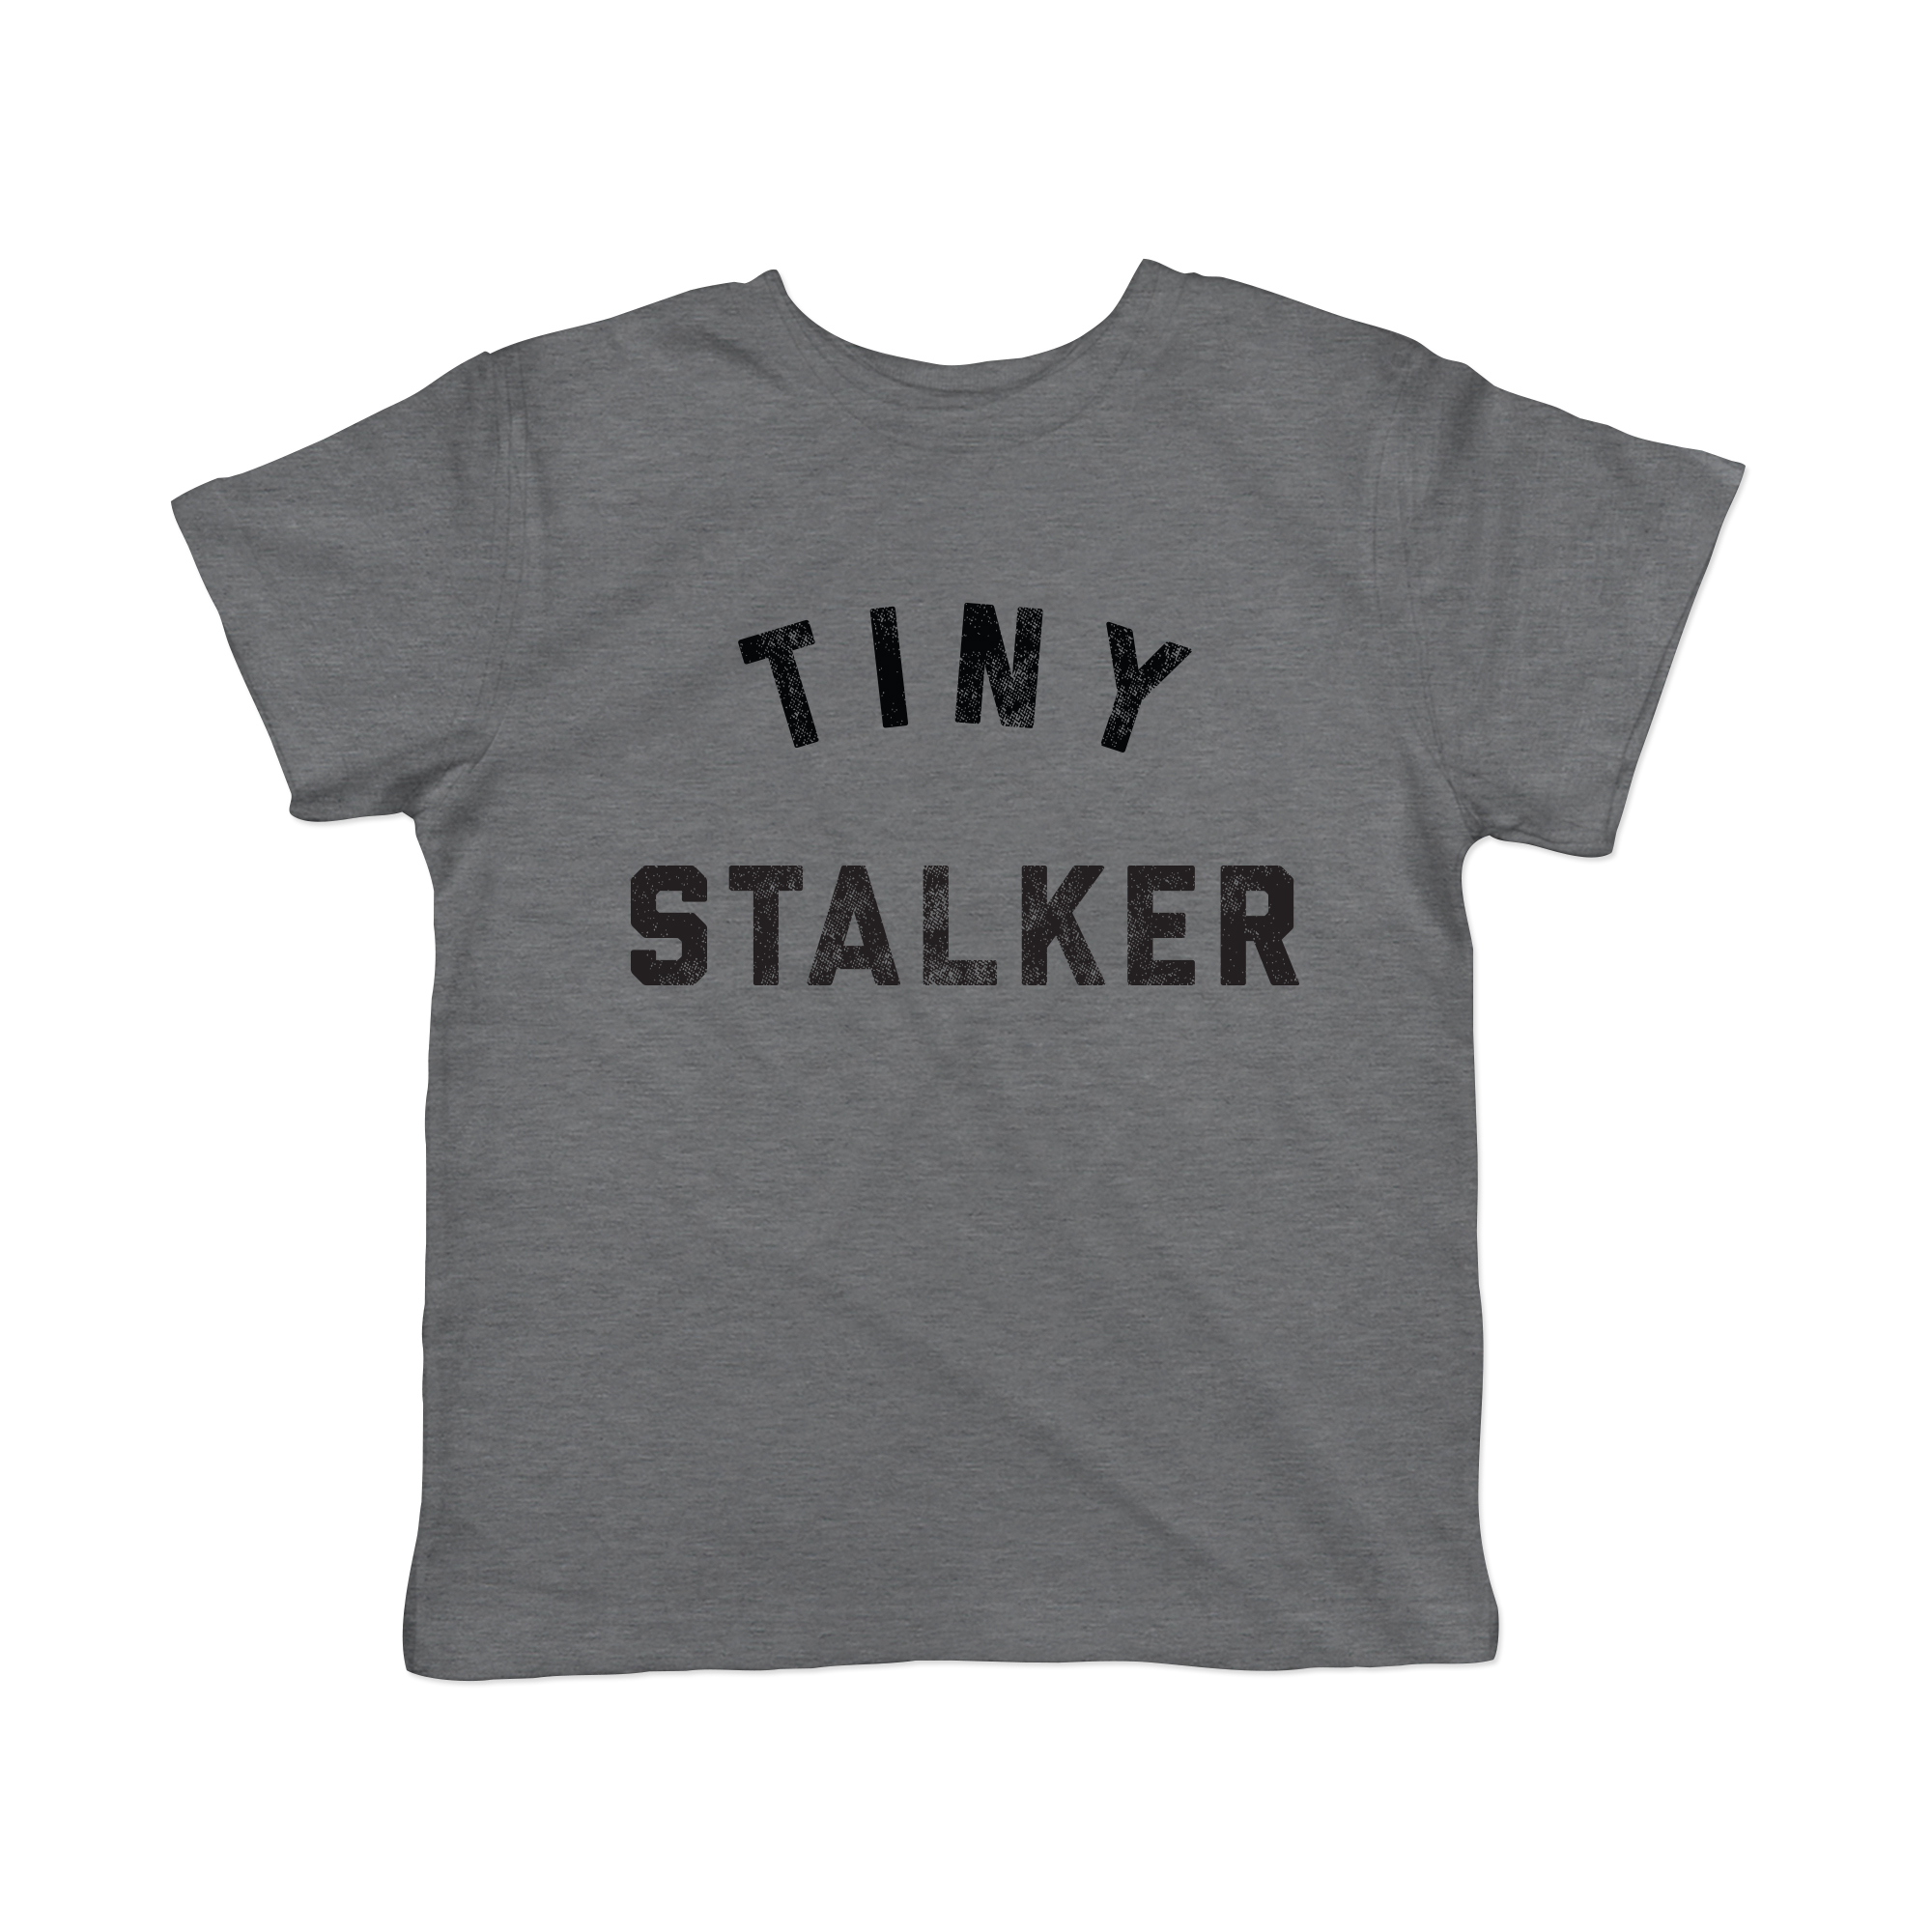 Crazy Dog Tshirts Toddler Tiny Stalker T Shirt Funny Needy Attention Joke Tee For Young Kids